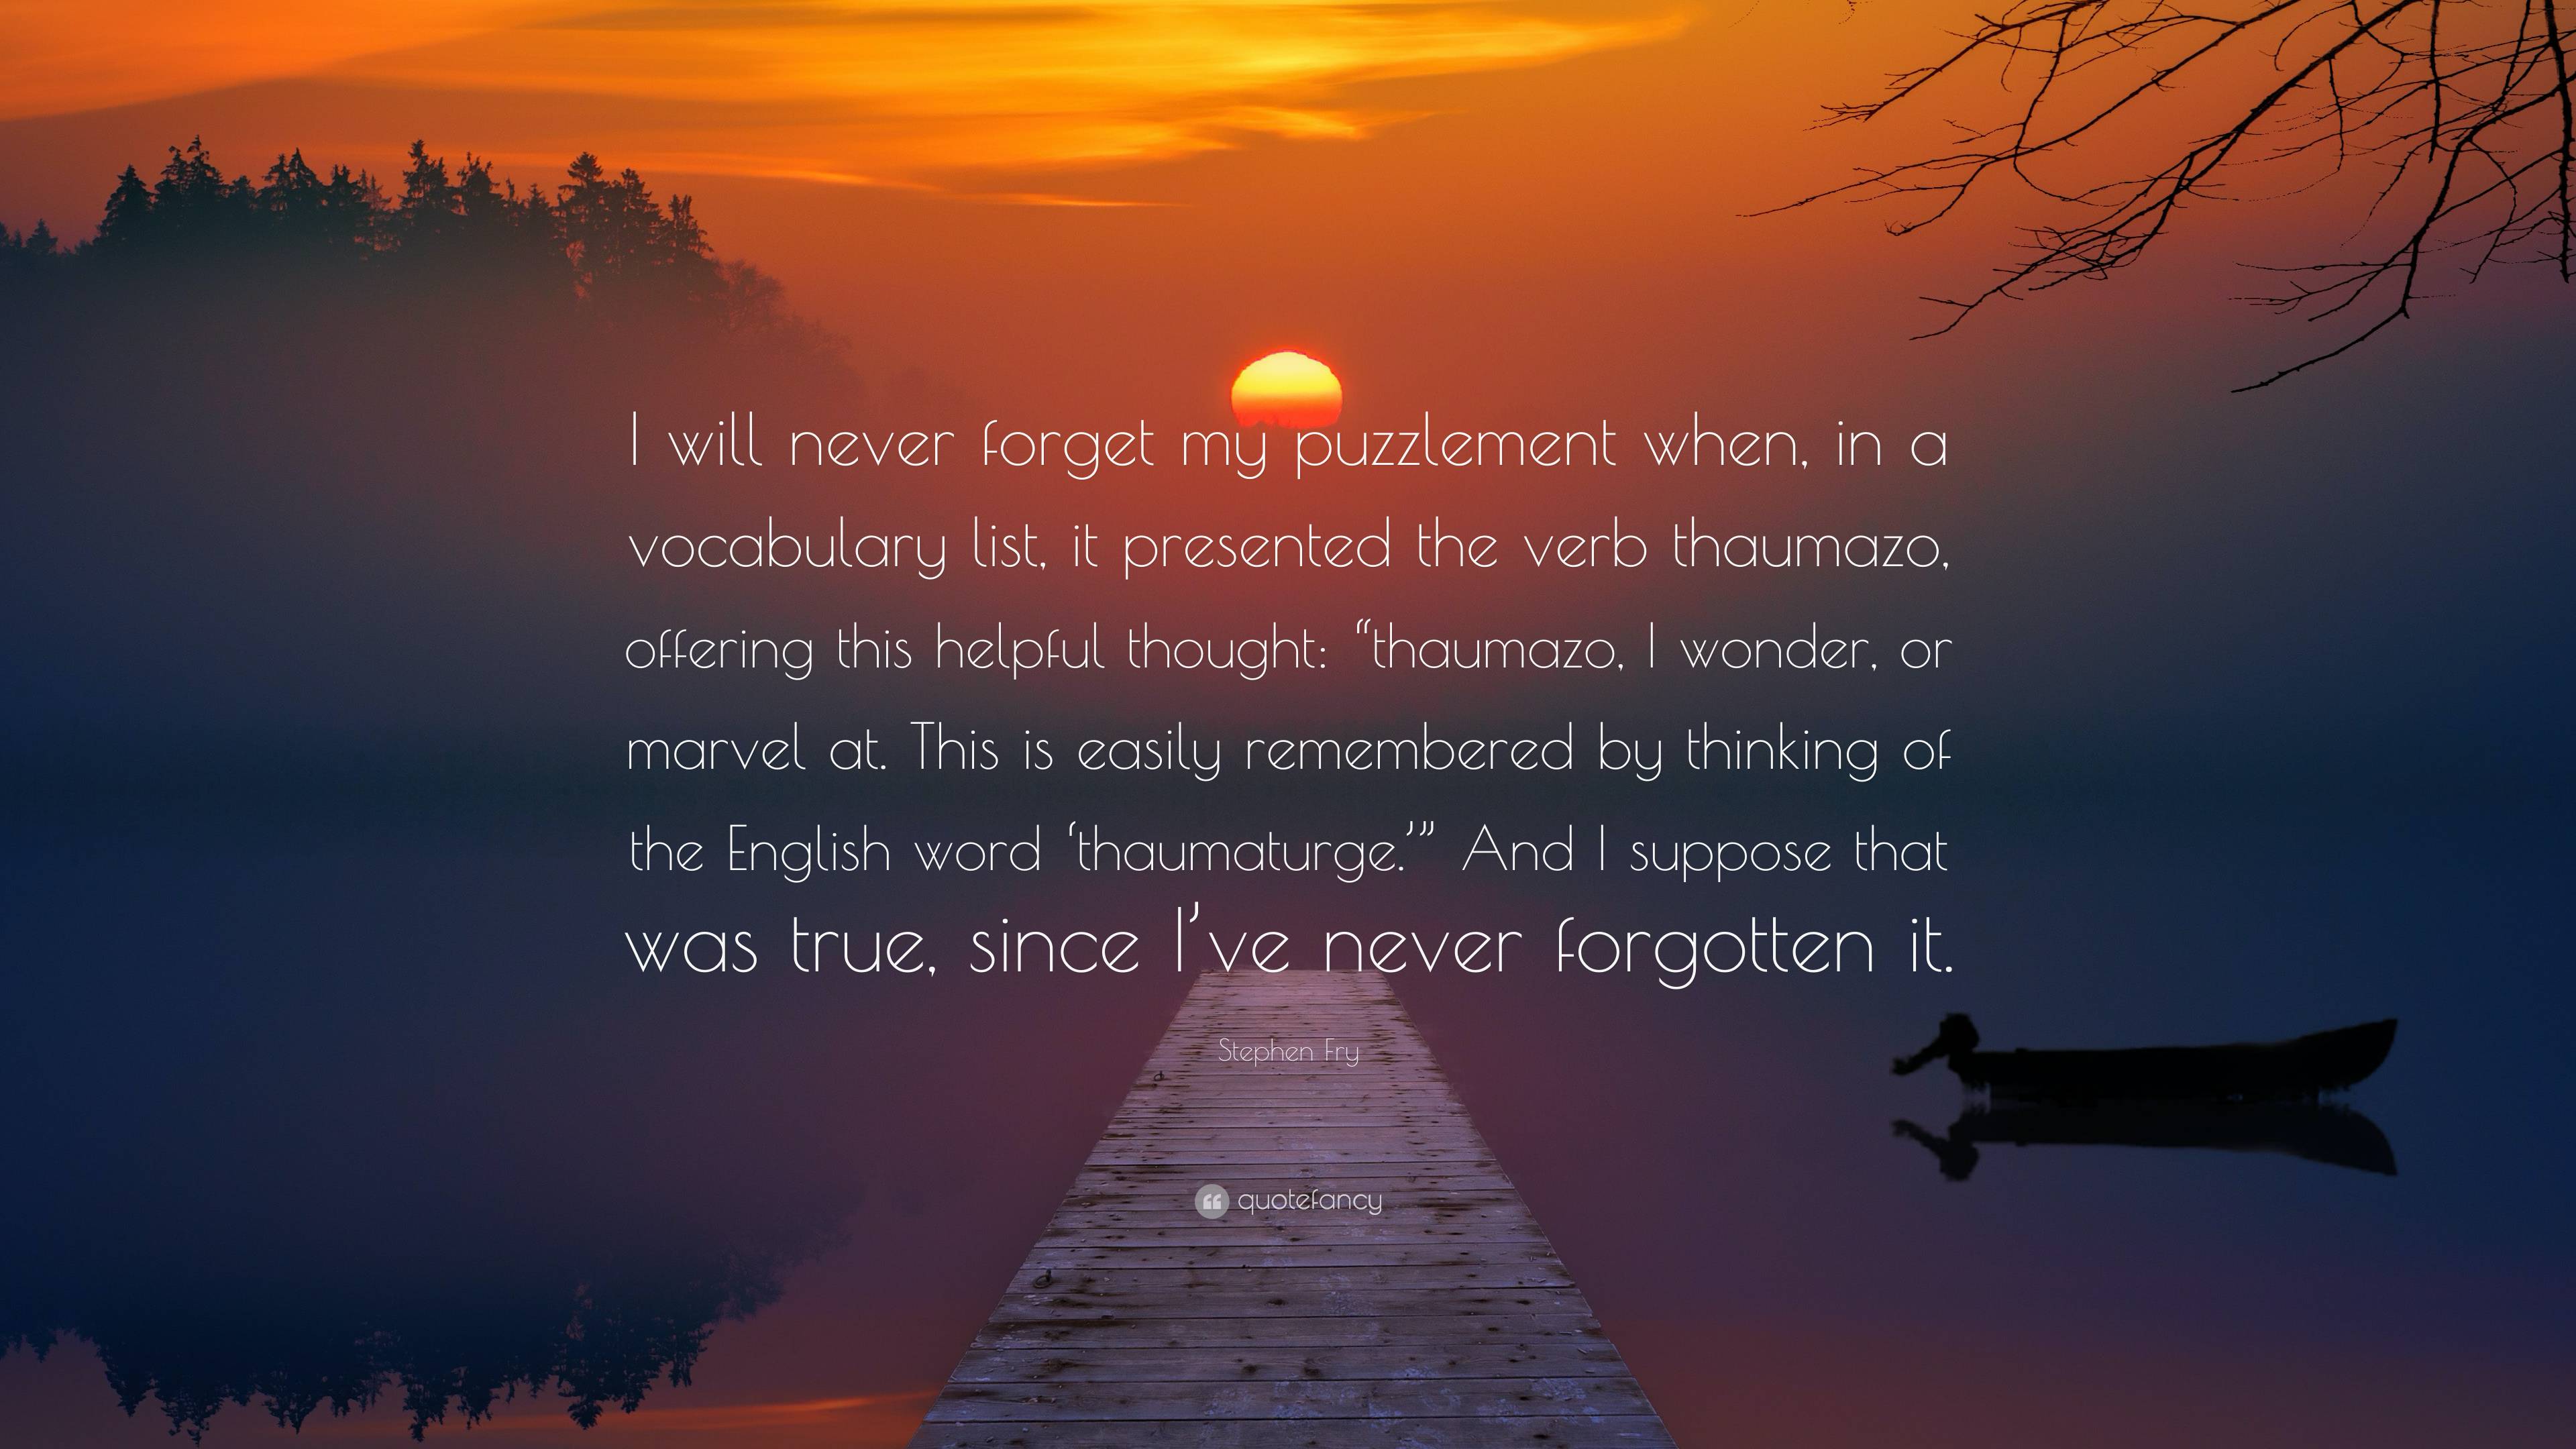 Stephen Fry Quote: “I will never forget my puzzlement when, in a ...